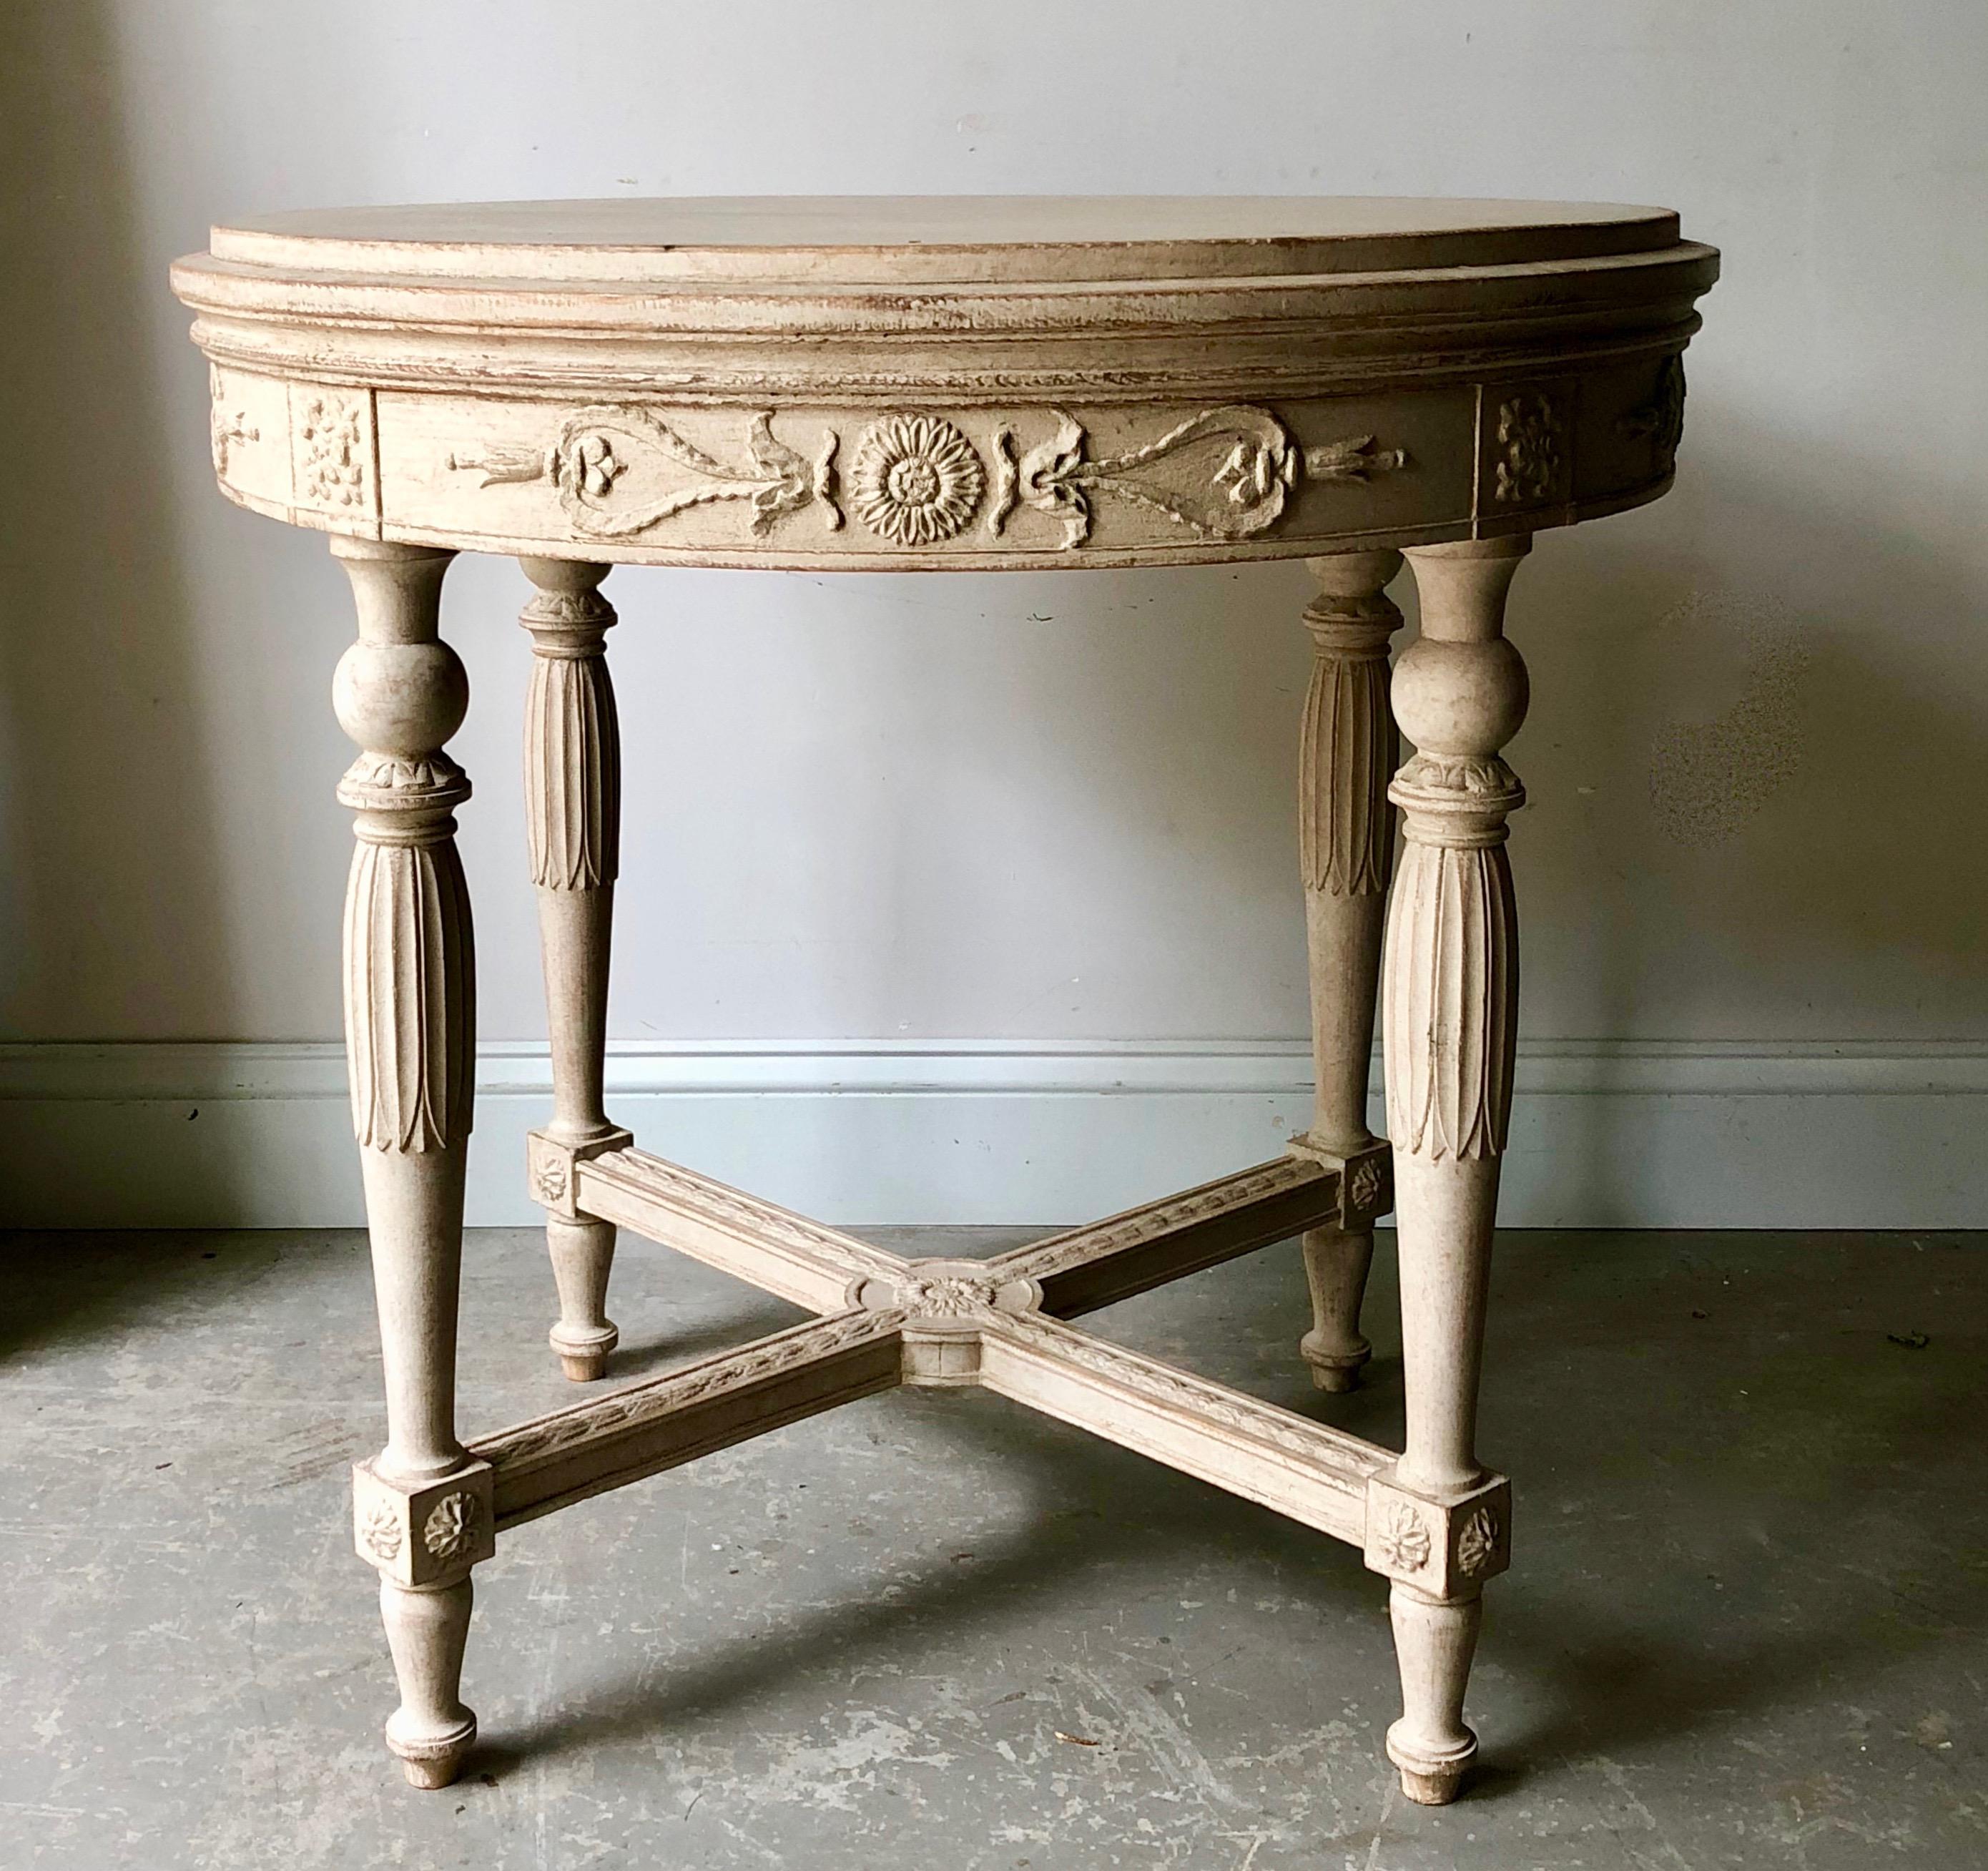 Swedish Gustavian style round table with richly carved apron, tapering carved legs and saltire stretcher with central medallion in worn cream patina. Stockholm, Sweden, circa 1880.
More than ever, we selected the best, the rarest, the unusual, the